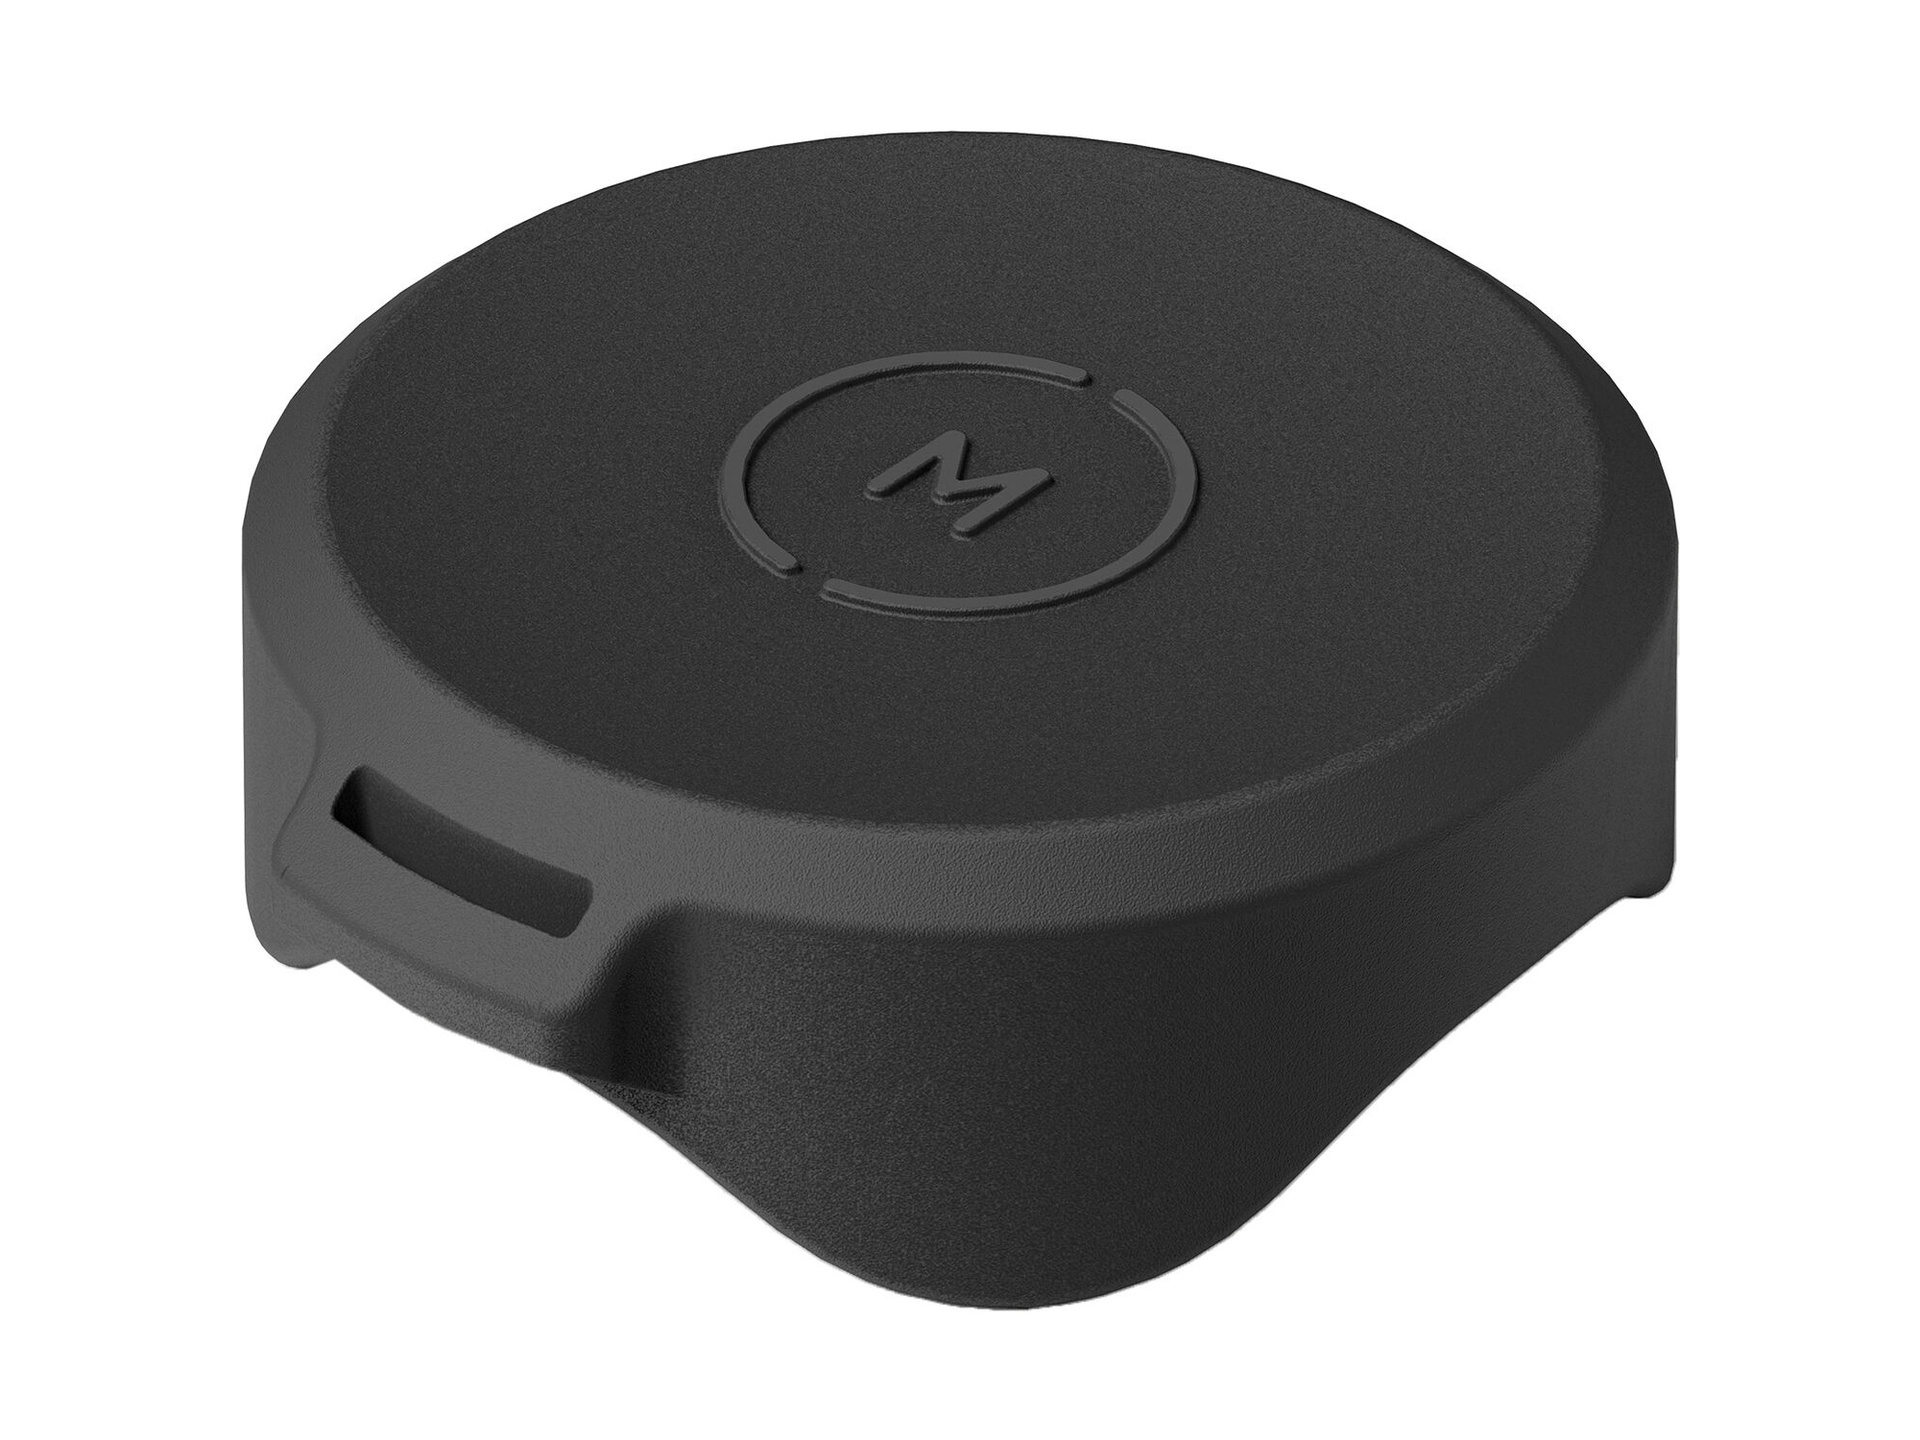 Moment Front Lens Cap for 18mm Wide and 58mm Tele Lenses